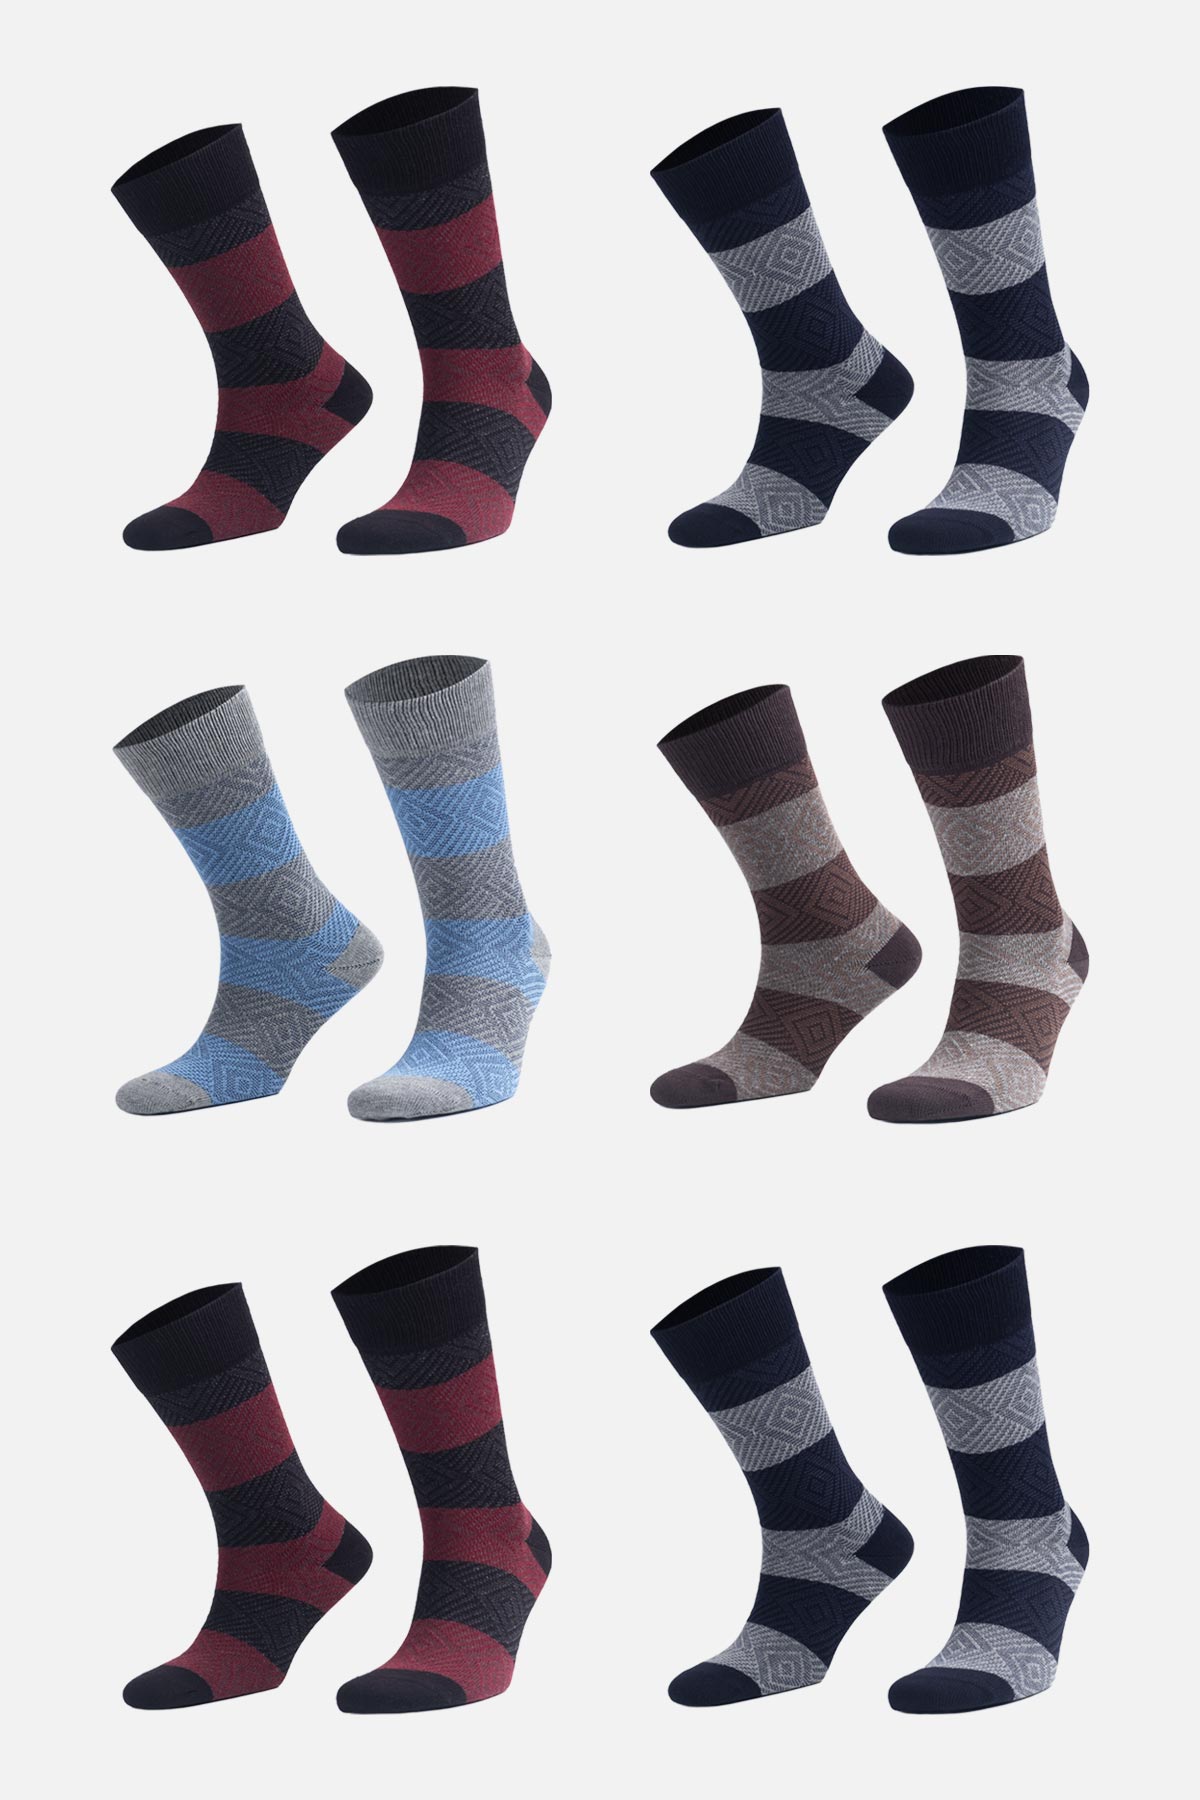 Marino Men's Dress Socks - Colorful Funky Socks for Men - Cotton Fashion  Patterned Socks - 12 Pack, Trendy Collection, 10-13 : Amazon.in: Clothing &  Accessories